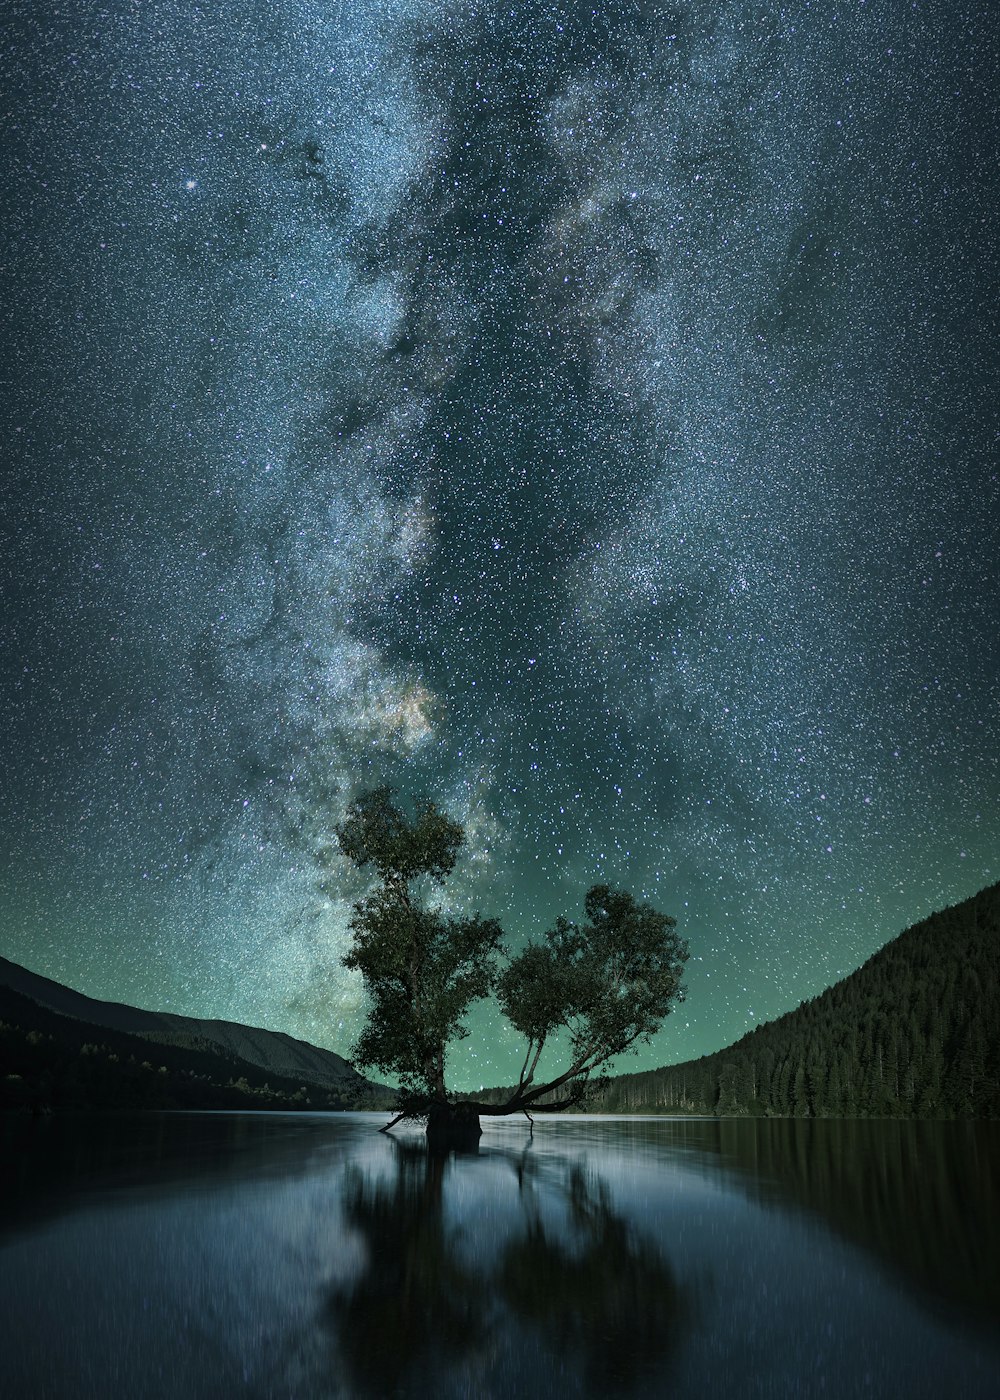 green leafed tree on body of water under starry sky